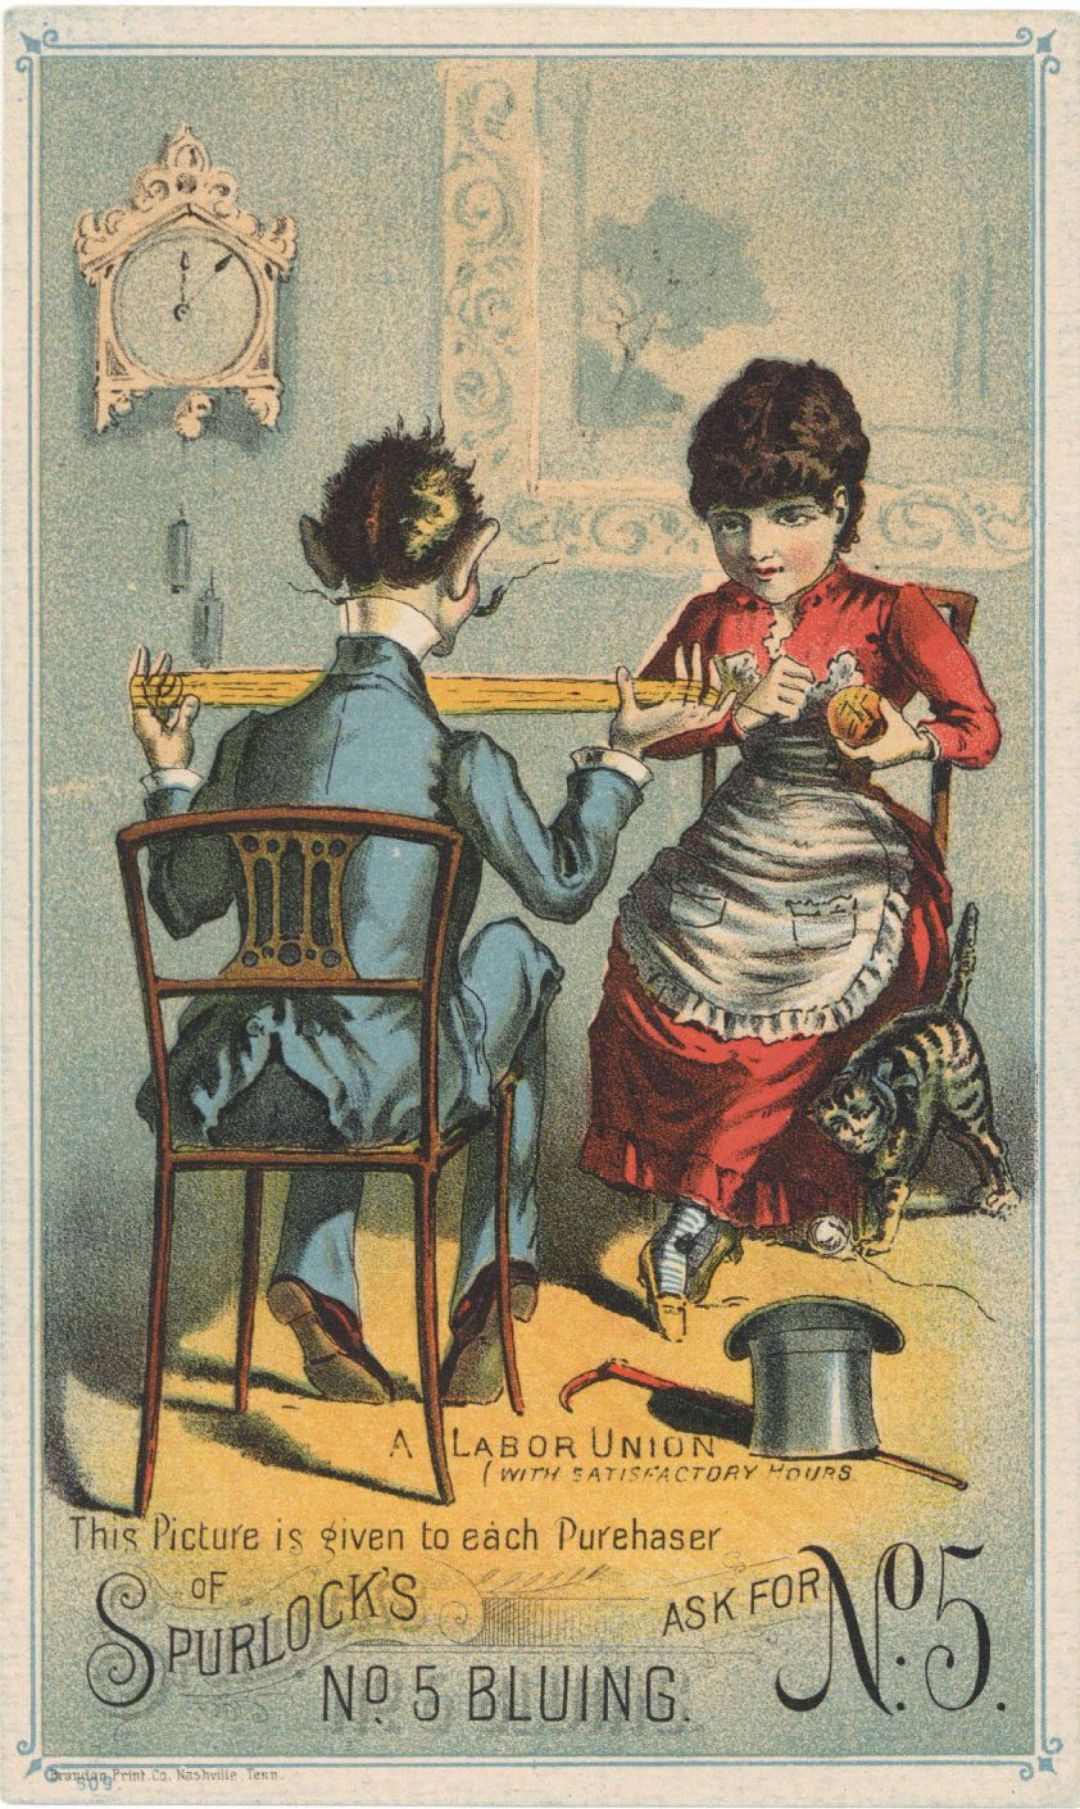 Advertising Card for Purlock's - Americana